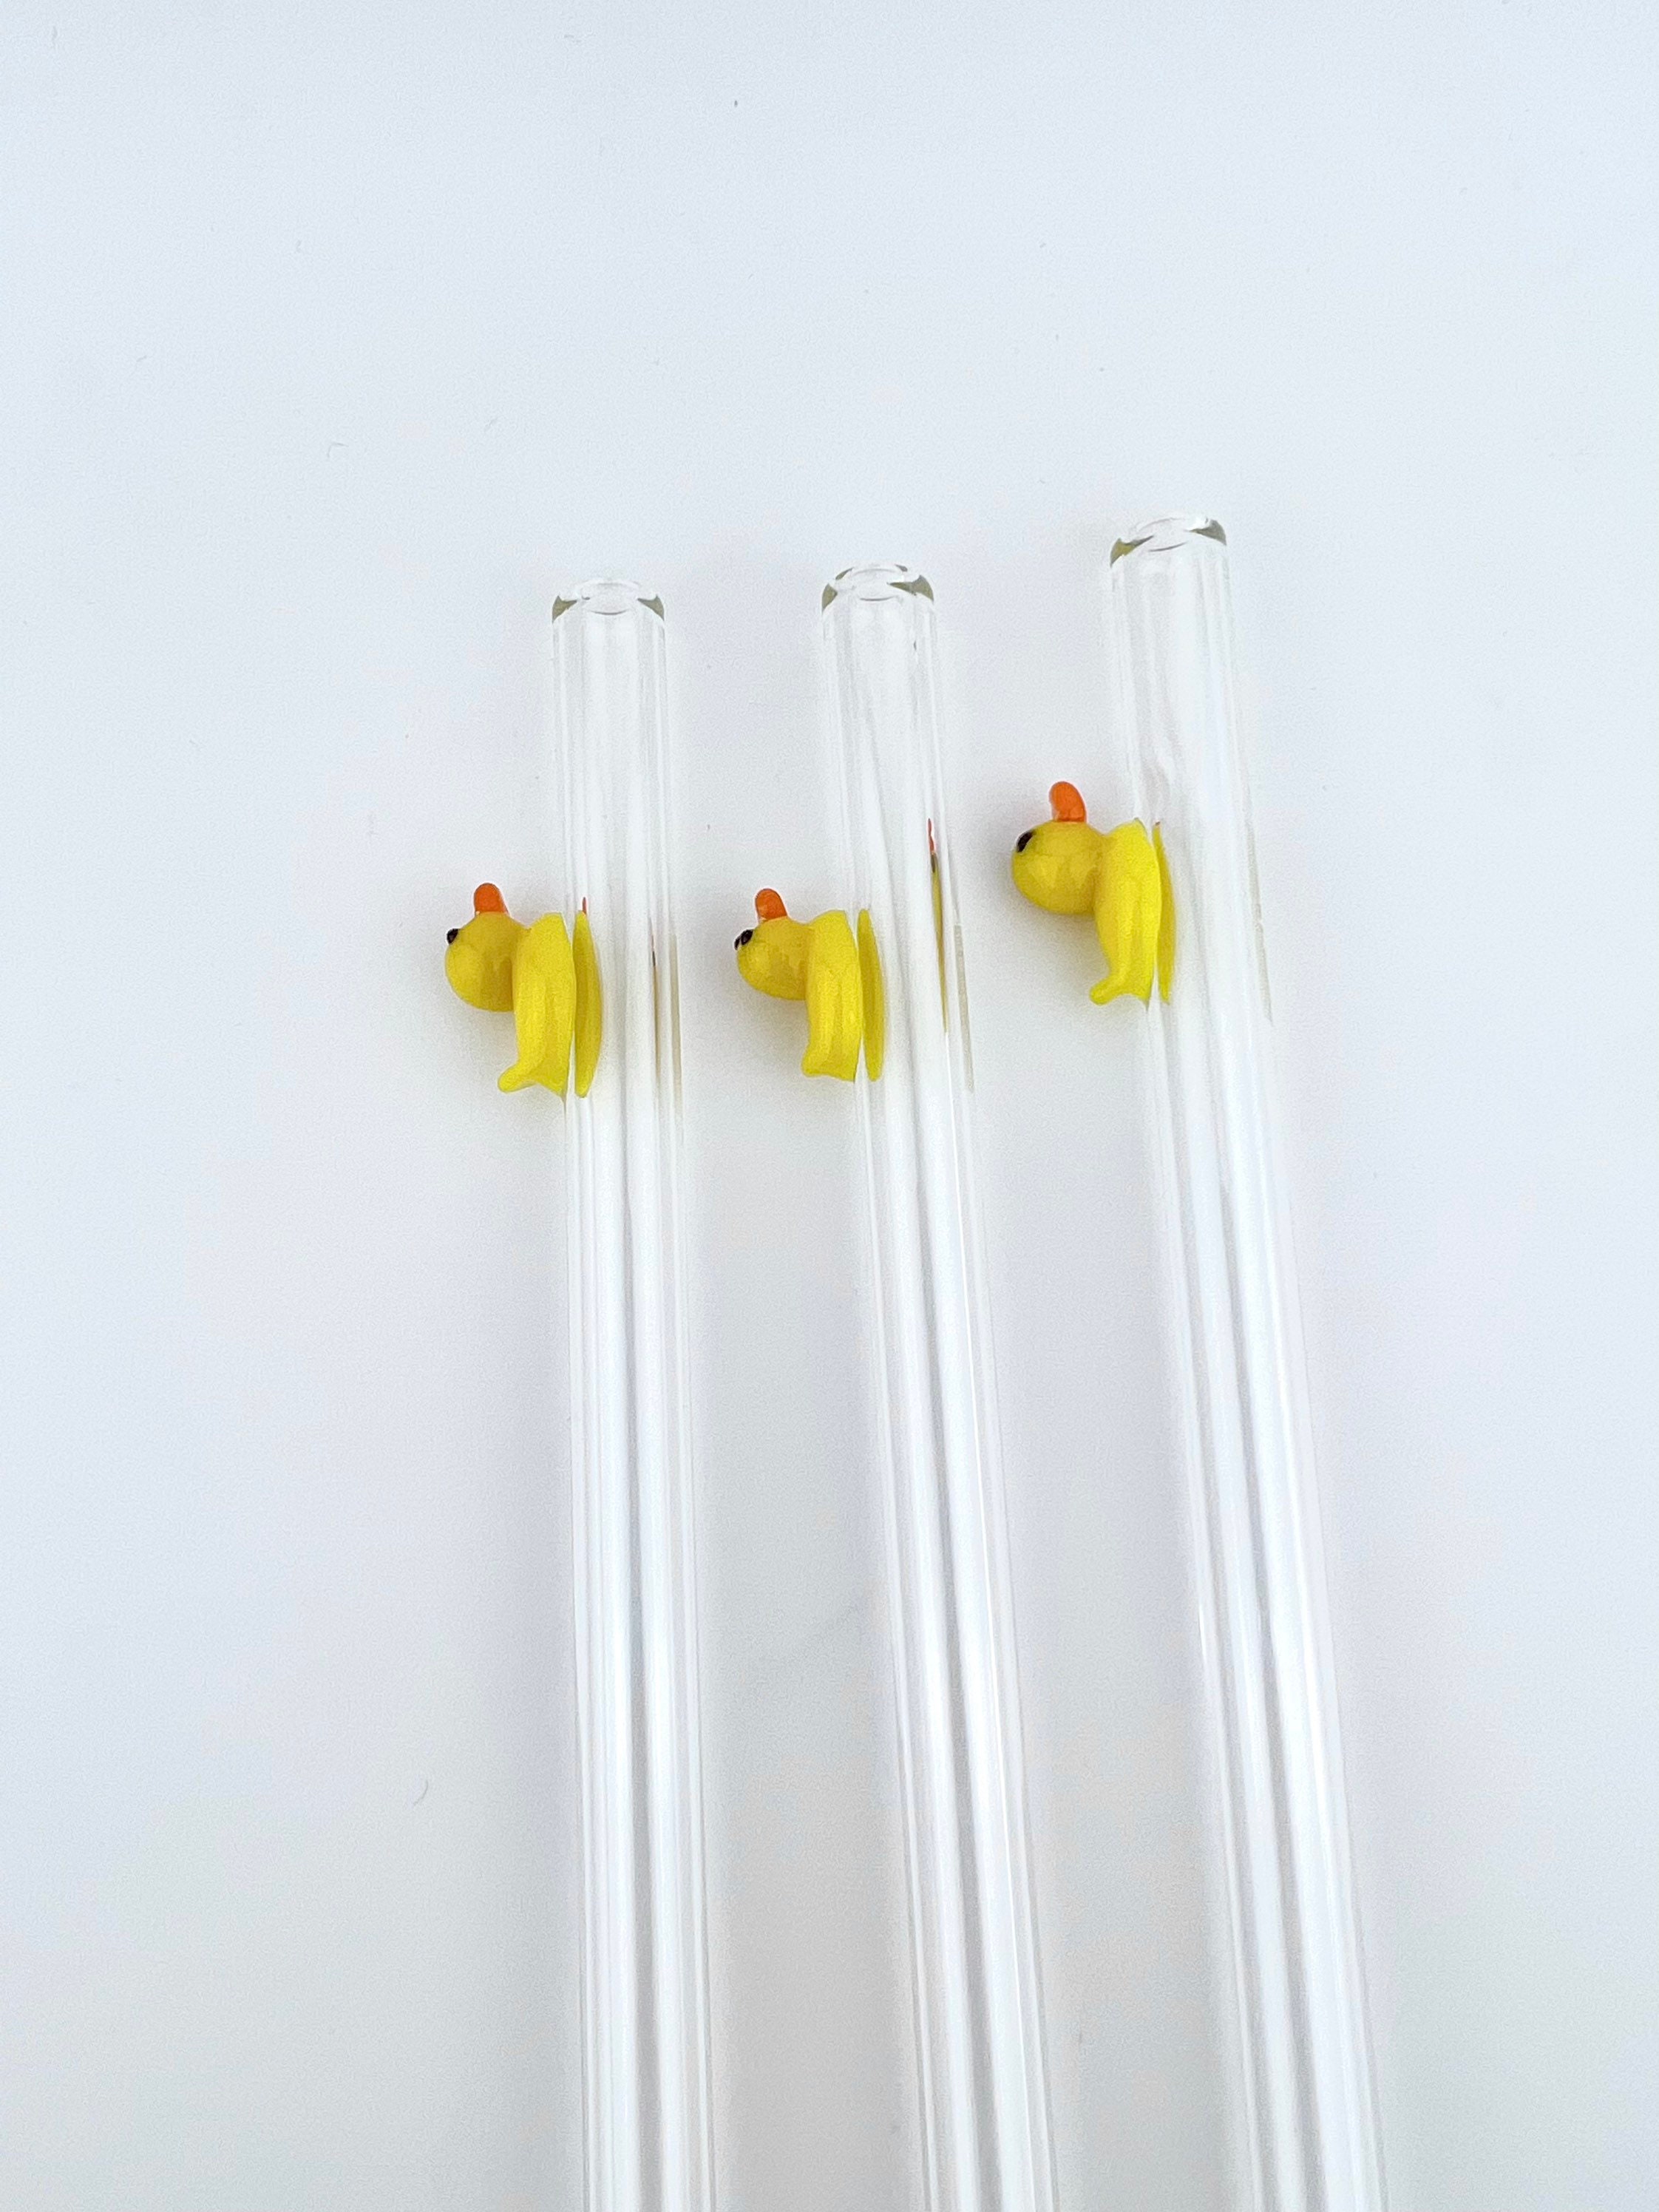 Duck Etched Glass Drinking Straw with Cleaning Brush - Drinking Straws.Glass